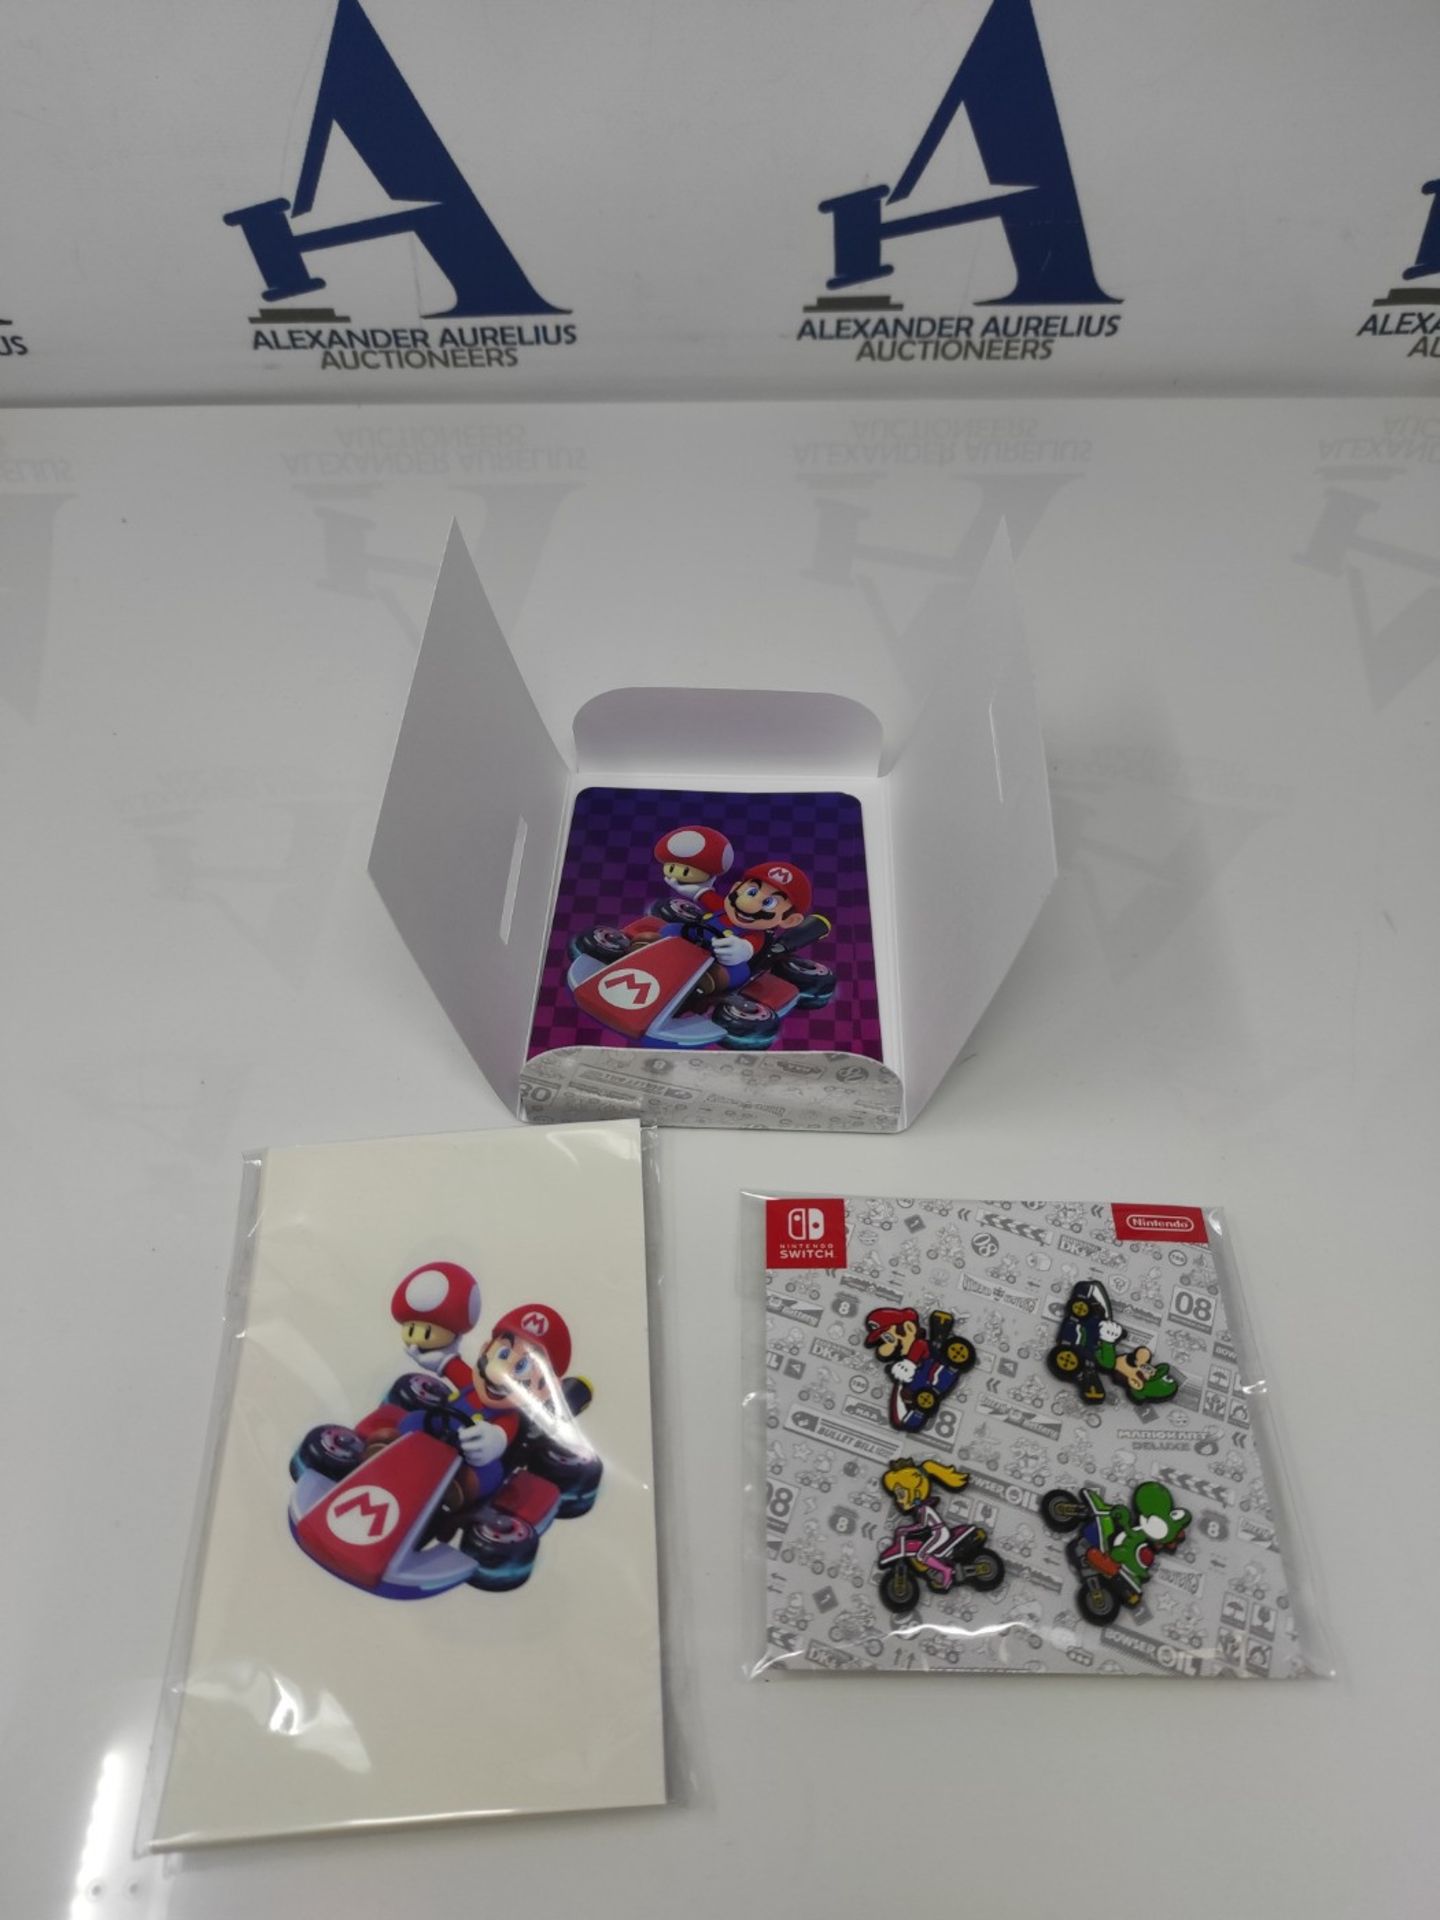 Mario Kart 8 Deluxe Booster Track Pass Set - [Nintendo Switch] - Image 3 of 3